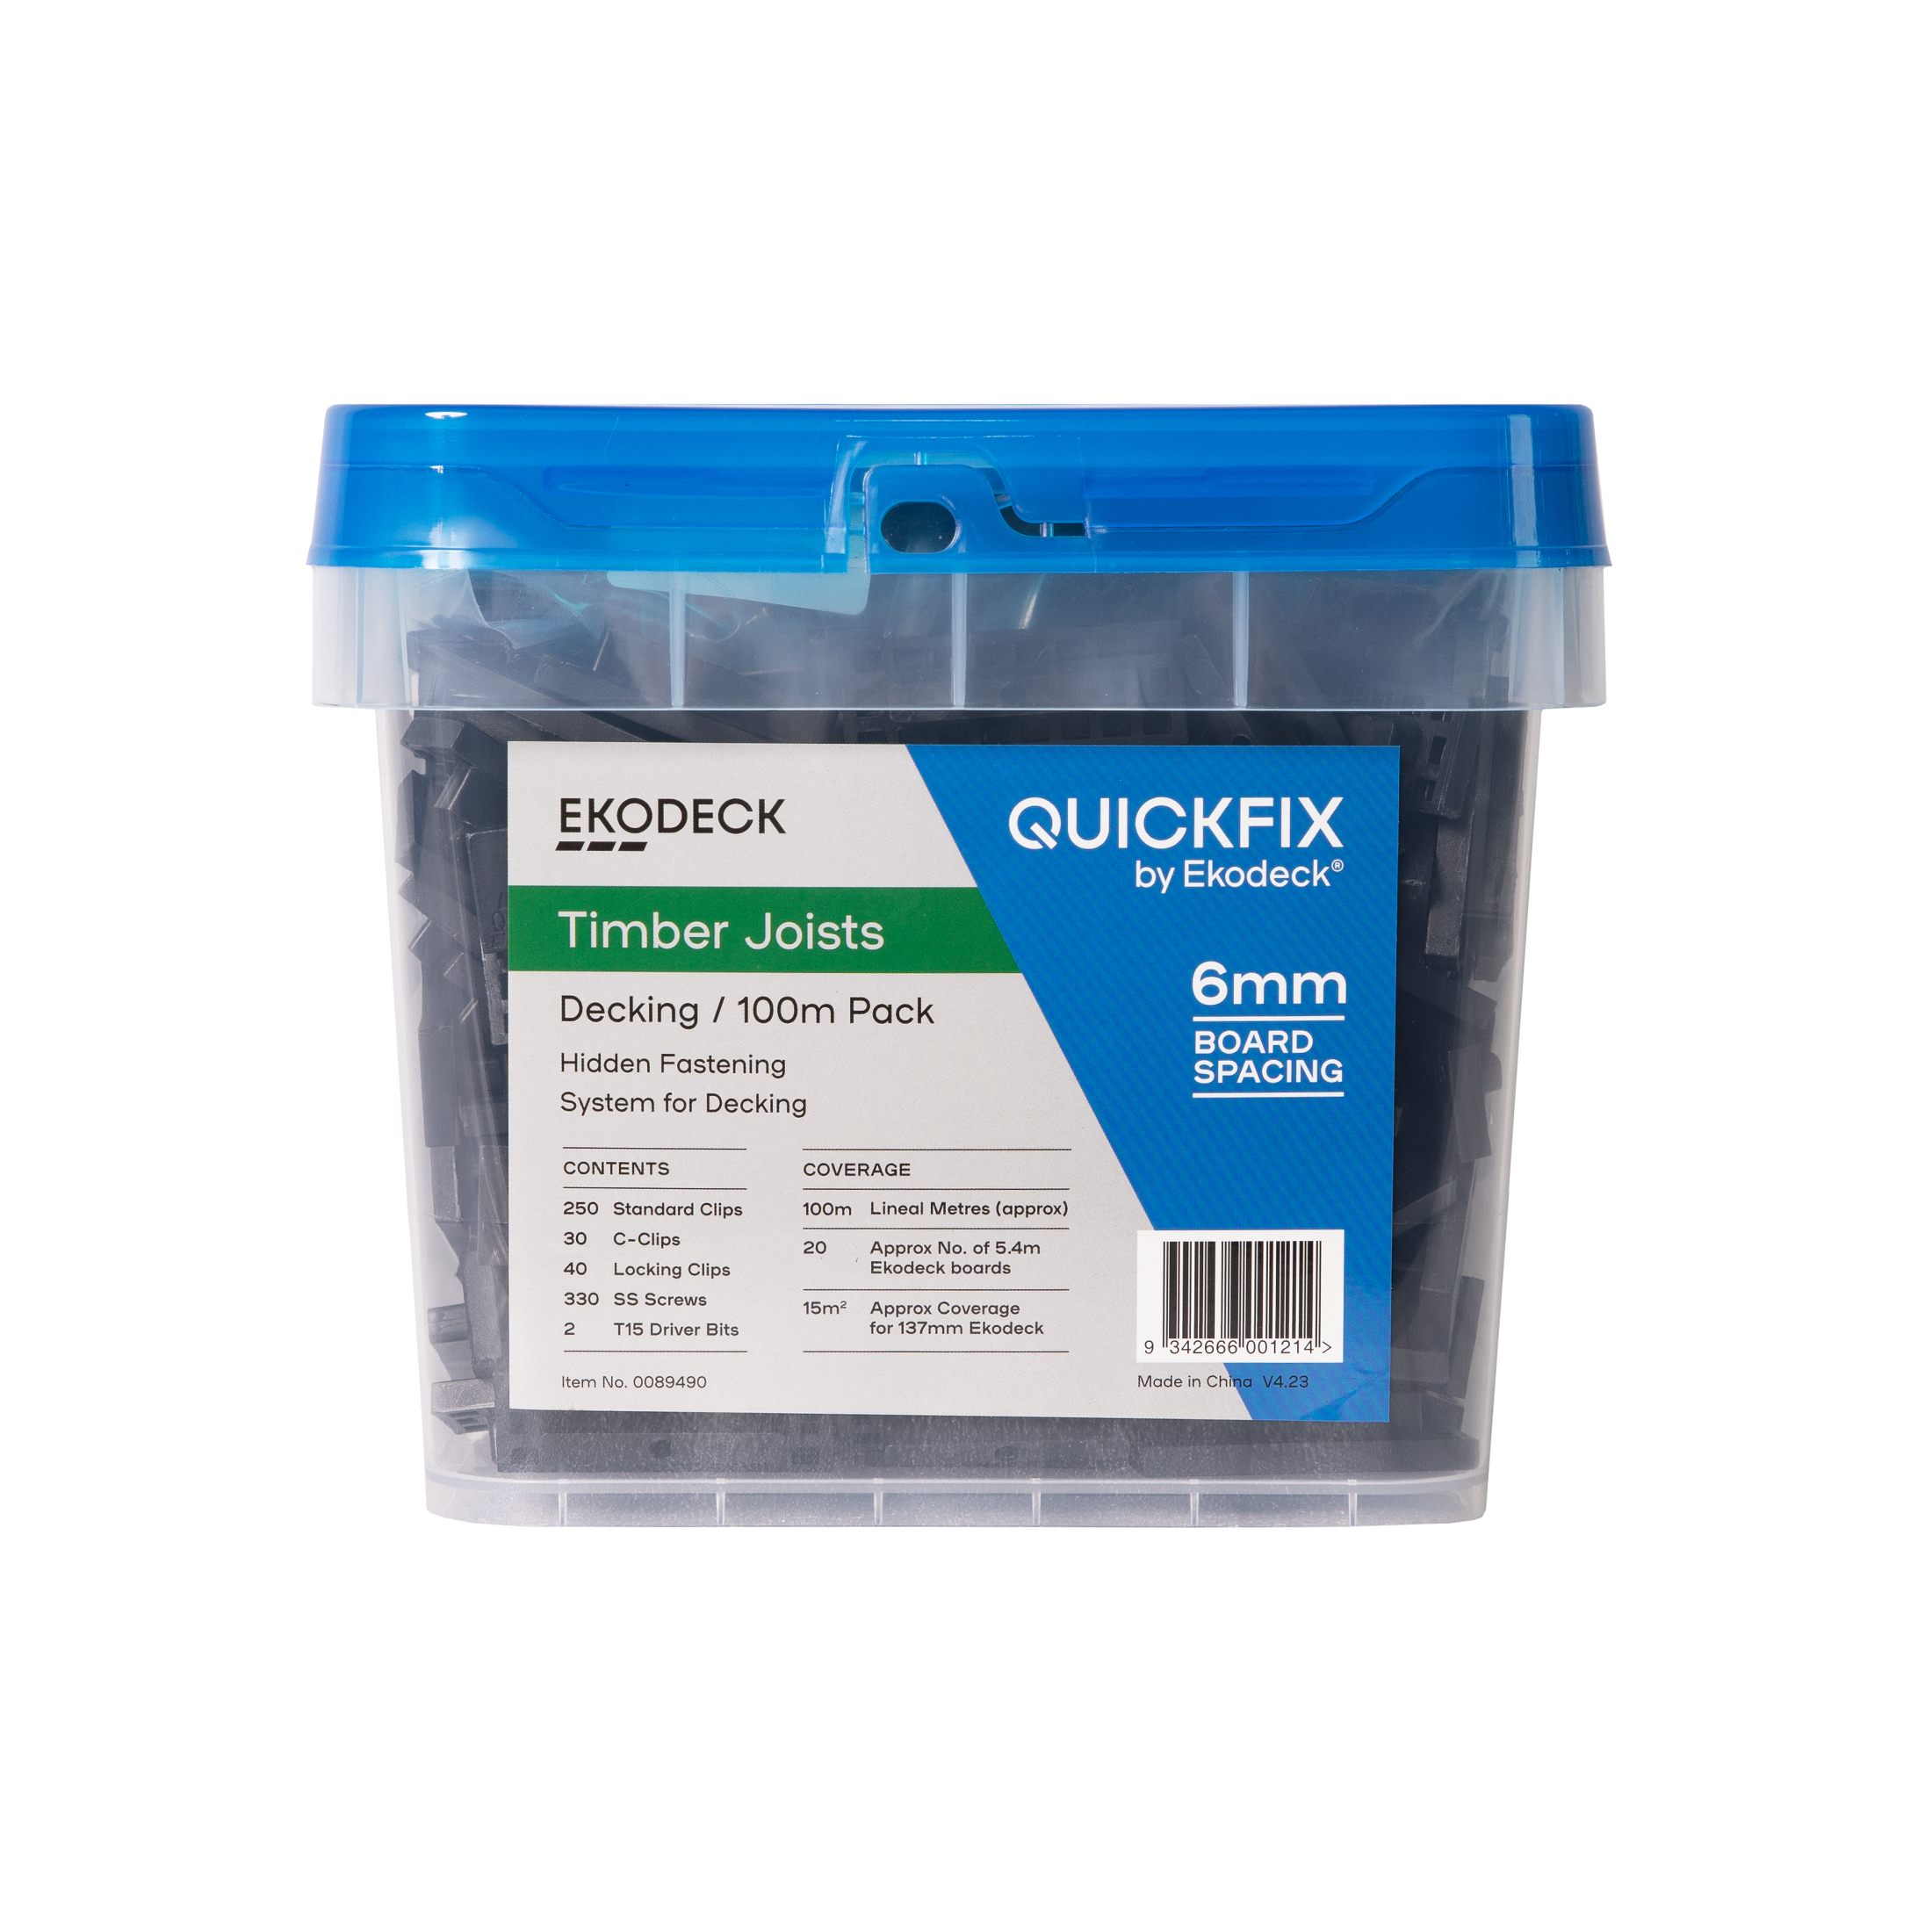 Quickfix for Ekodeck 6mm 100lm Kit - Timber Joists